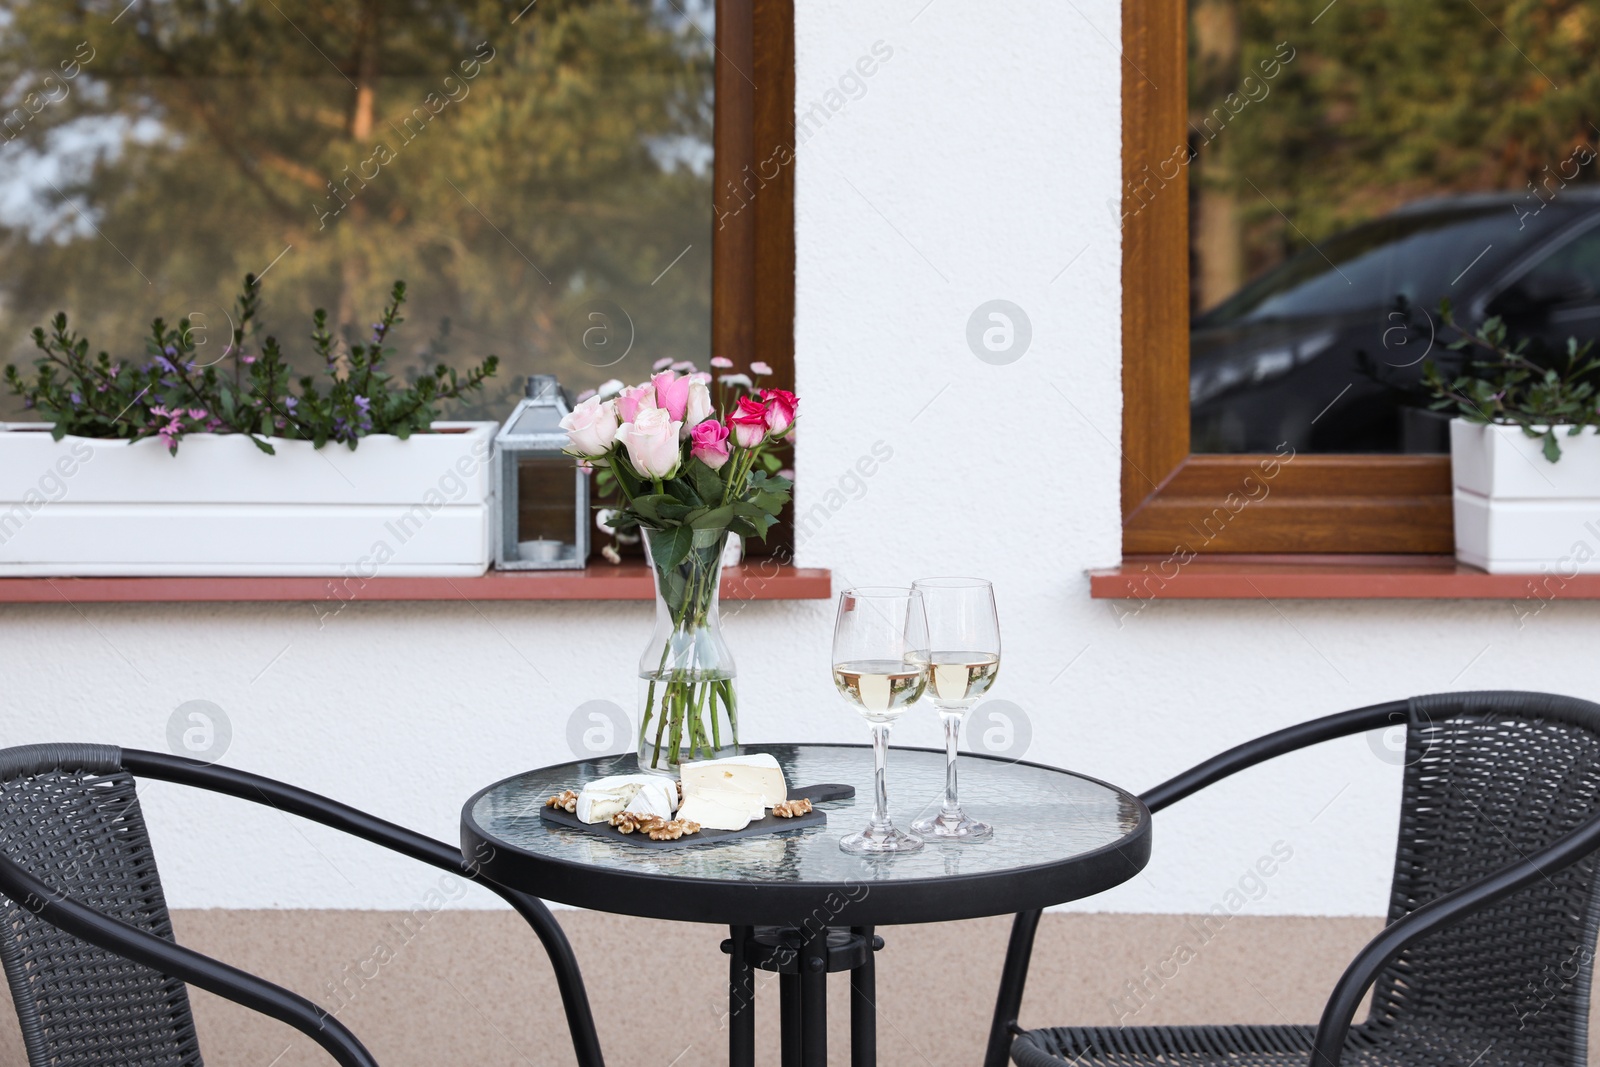 Photo of Vase with roses, glasses of wine and food on glass table near house on outdoor terrace